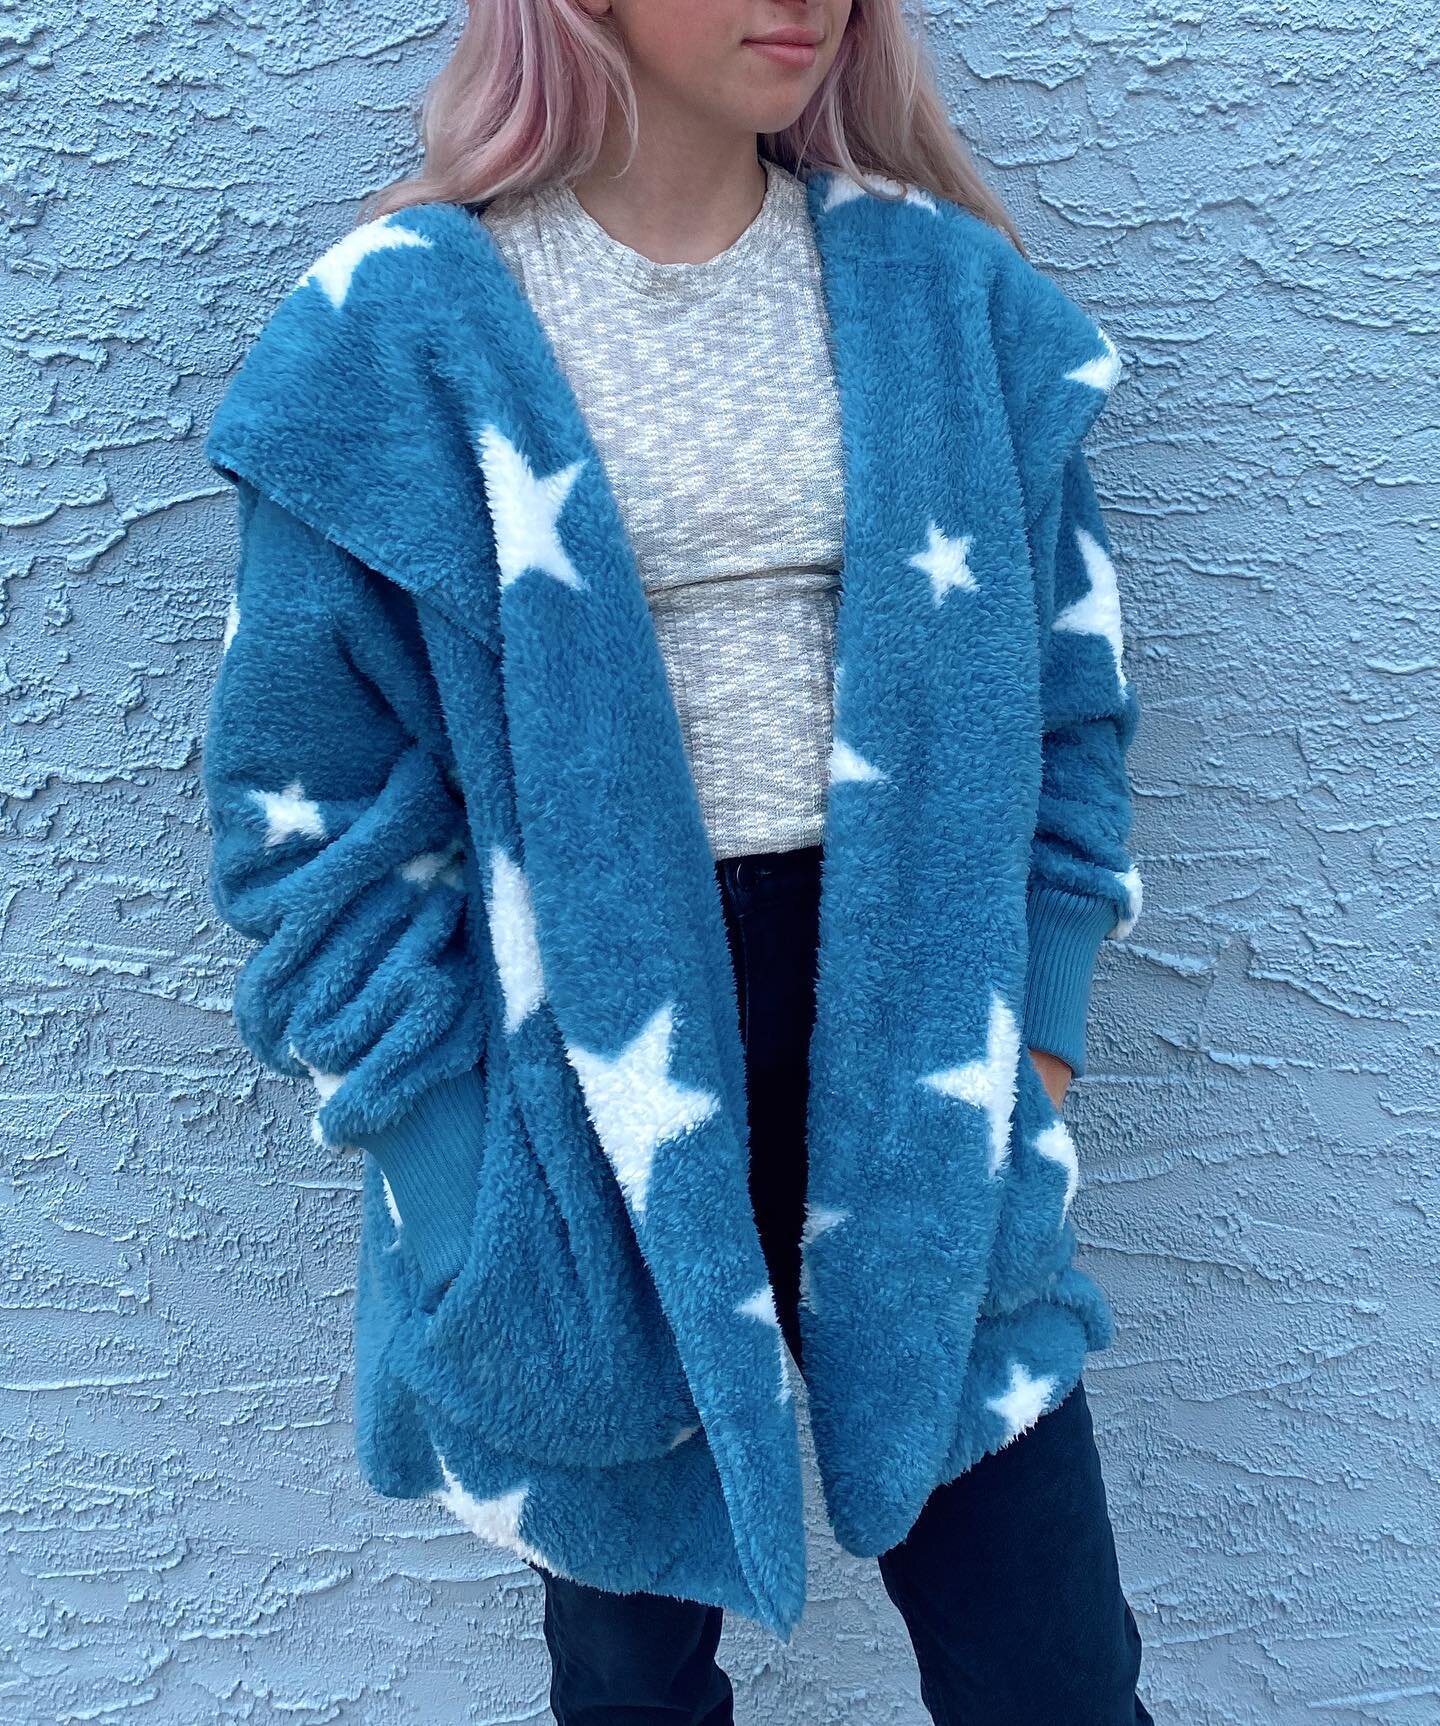 Fuzzy season is approaching fast! 🤩
&bull;
-
&bull;
-
#fuzzyjacket #starprint #staywarm #fallfashion #supportsmallbusiness #supportlocal #shopsmall #happyvalley #statecollege #pennstate #connectionsclothingsc